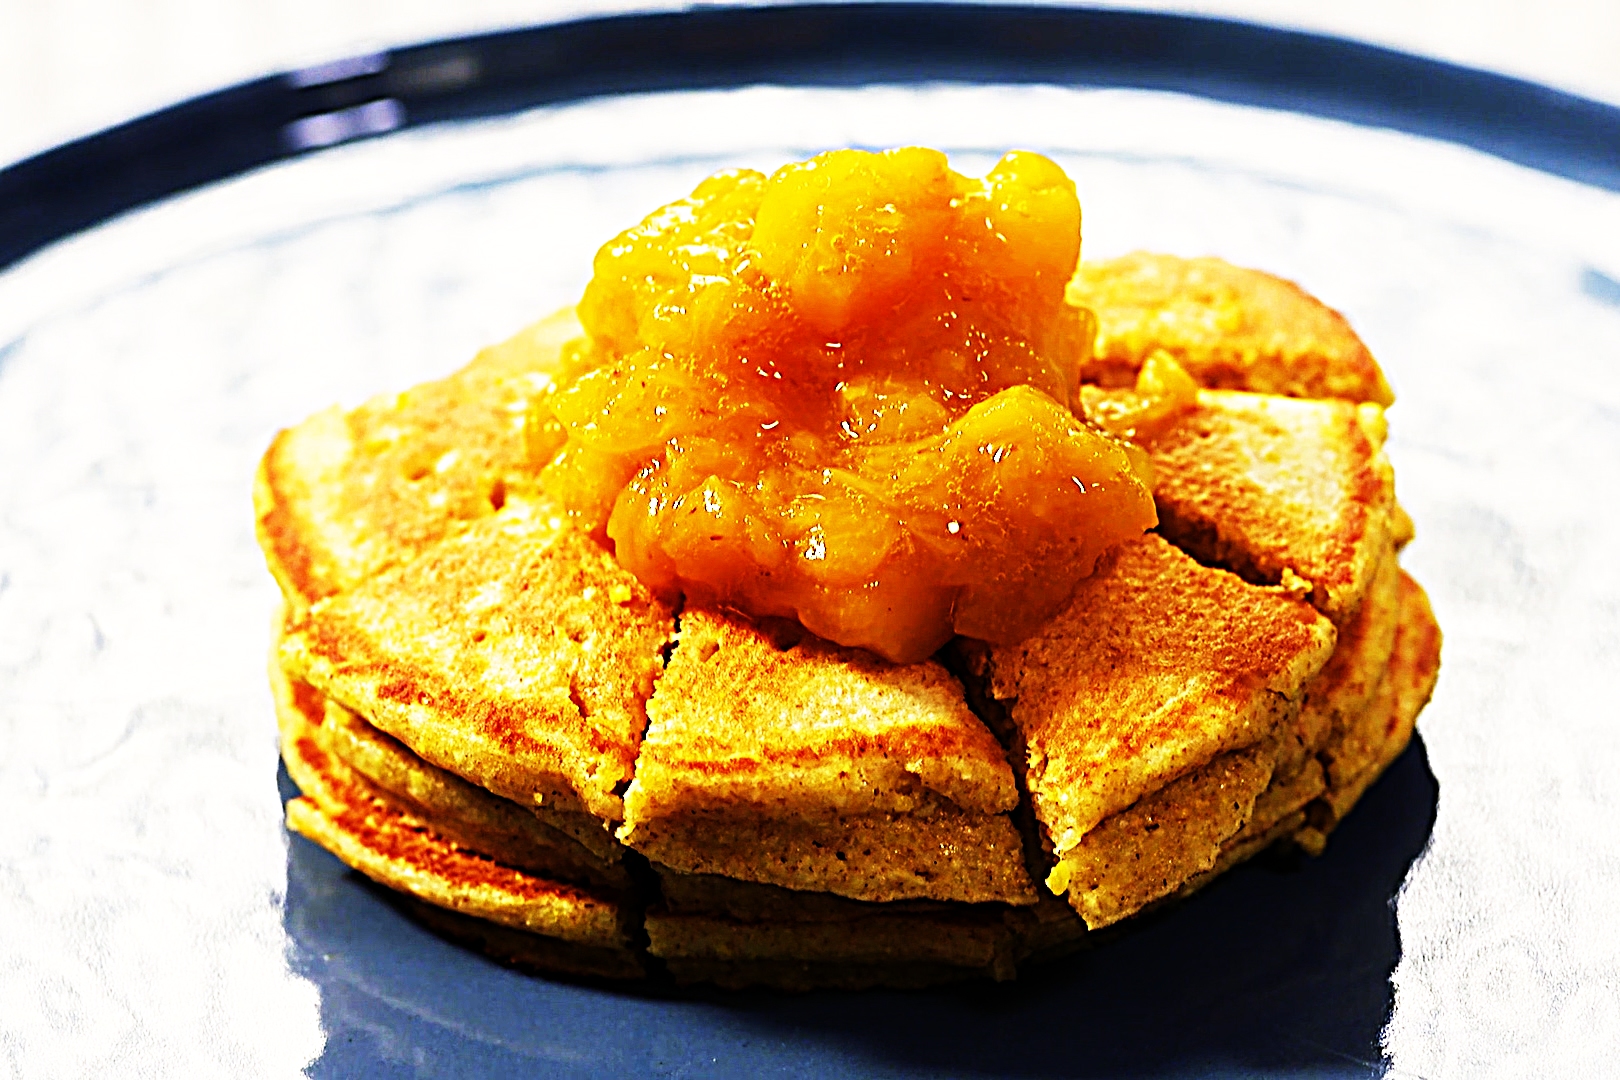 Stupid-Easy Recipe for Cornmeal Pancakes with Peach Compote (#1 Top-Rated)